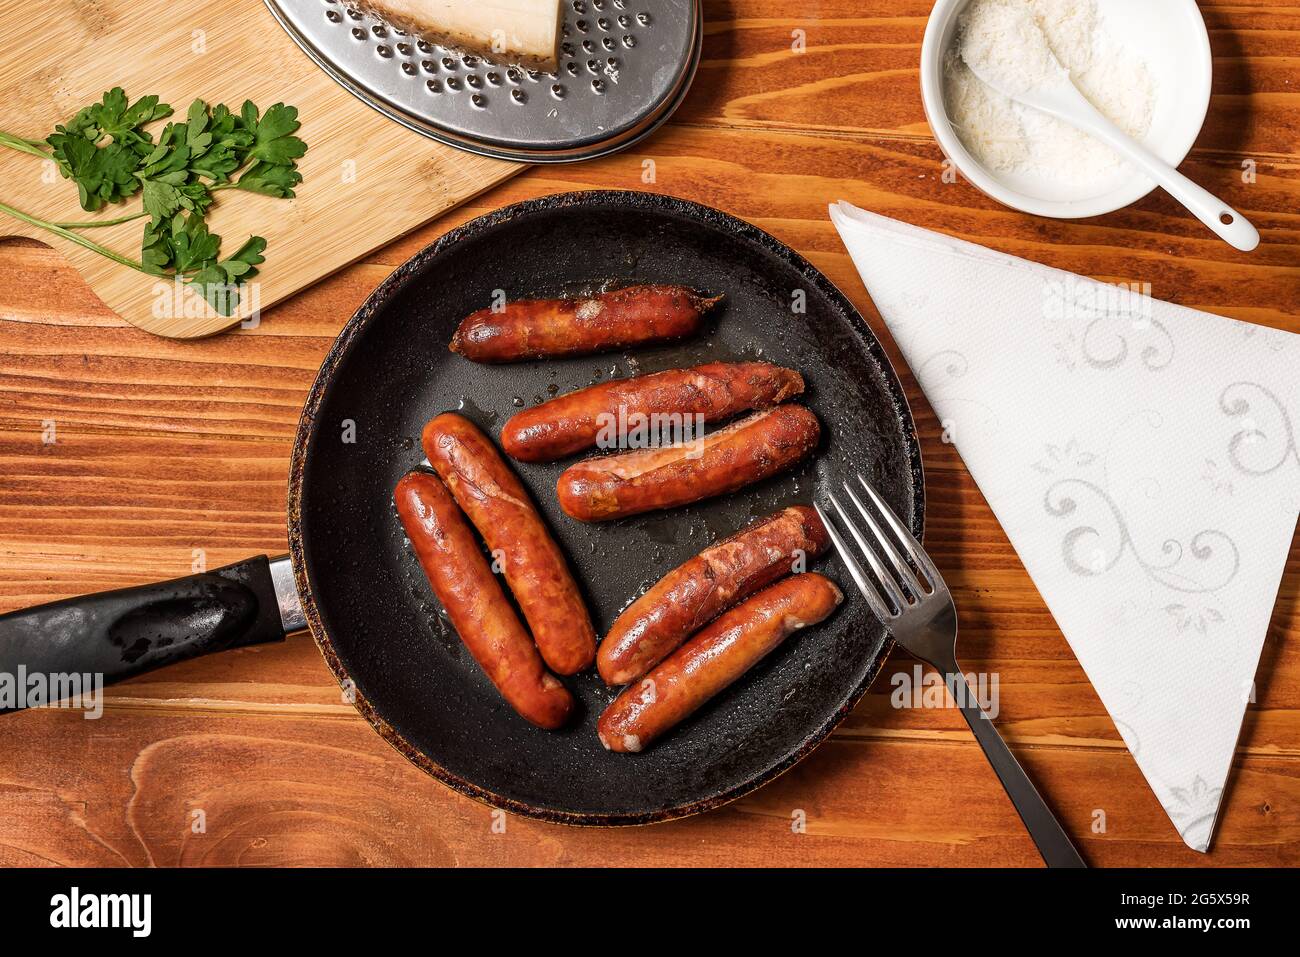 Tasty fried sausages in frying pan with Parmigiano and parsley, over wooden background. Top view Stock Photo